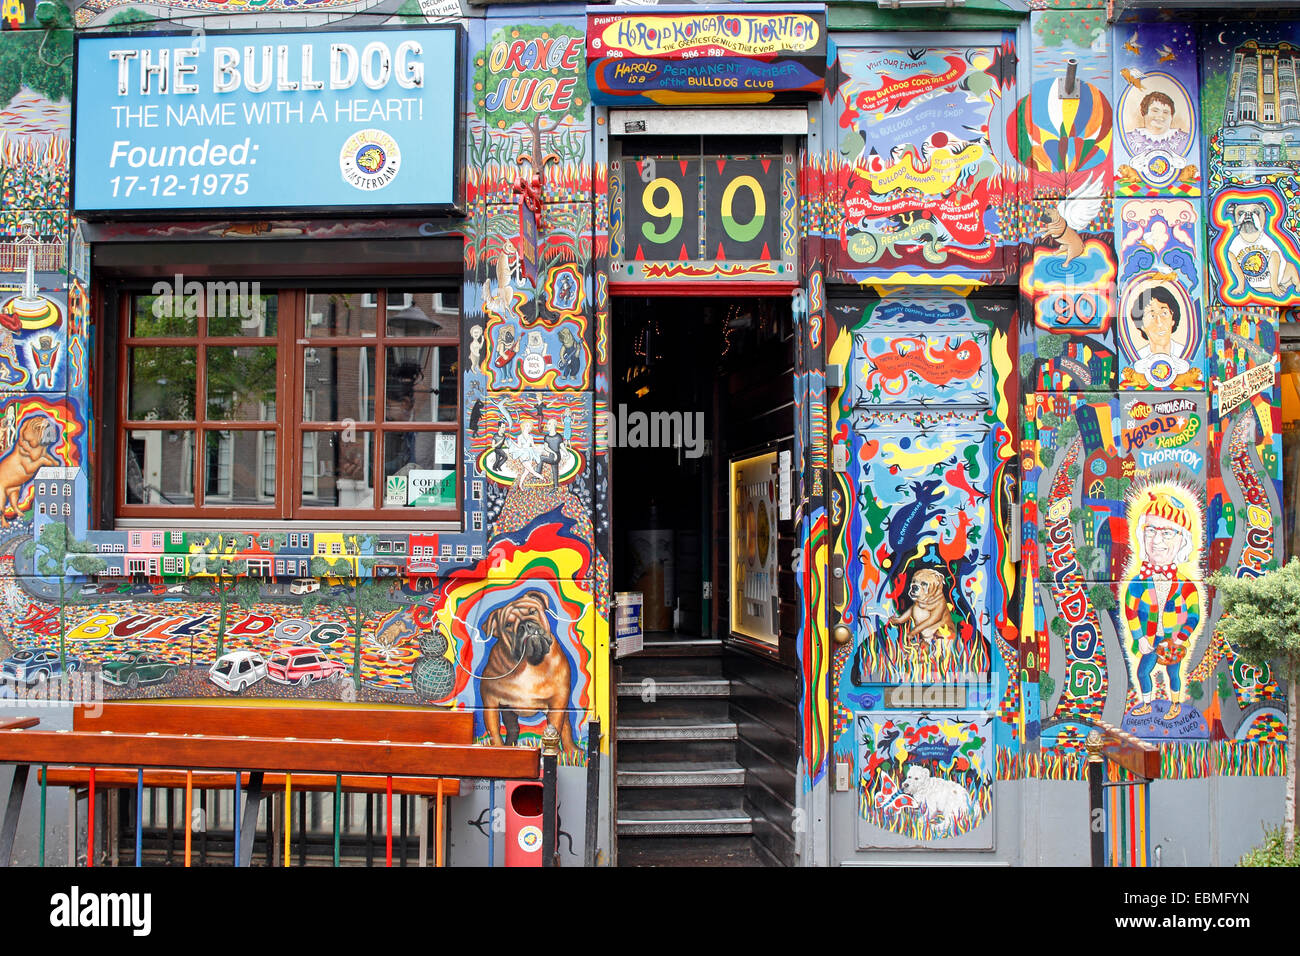 Facade and door of The Bulldog coffee house, Amsterdam, province of North Holland, The Netherlands Stock Photo